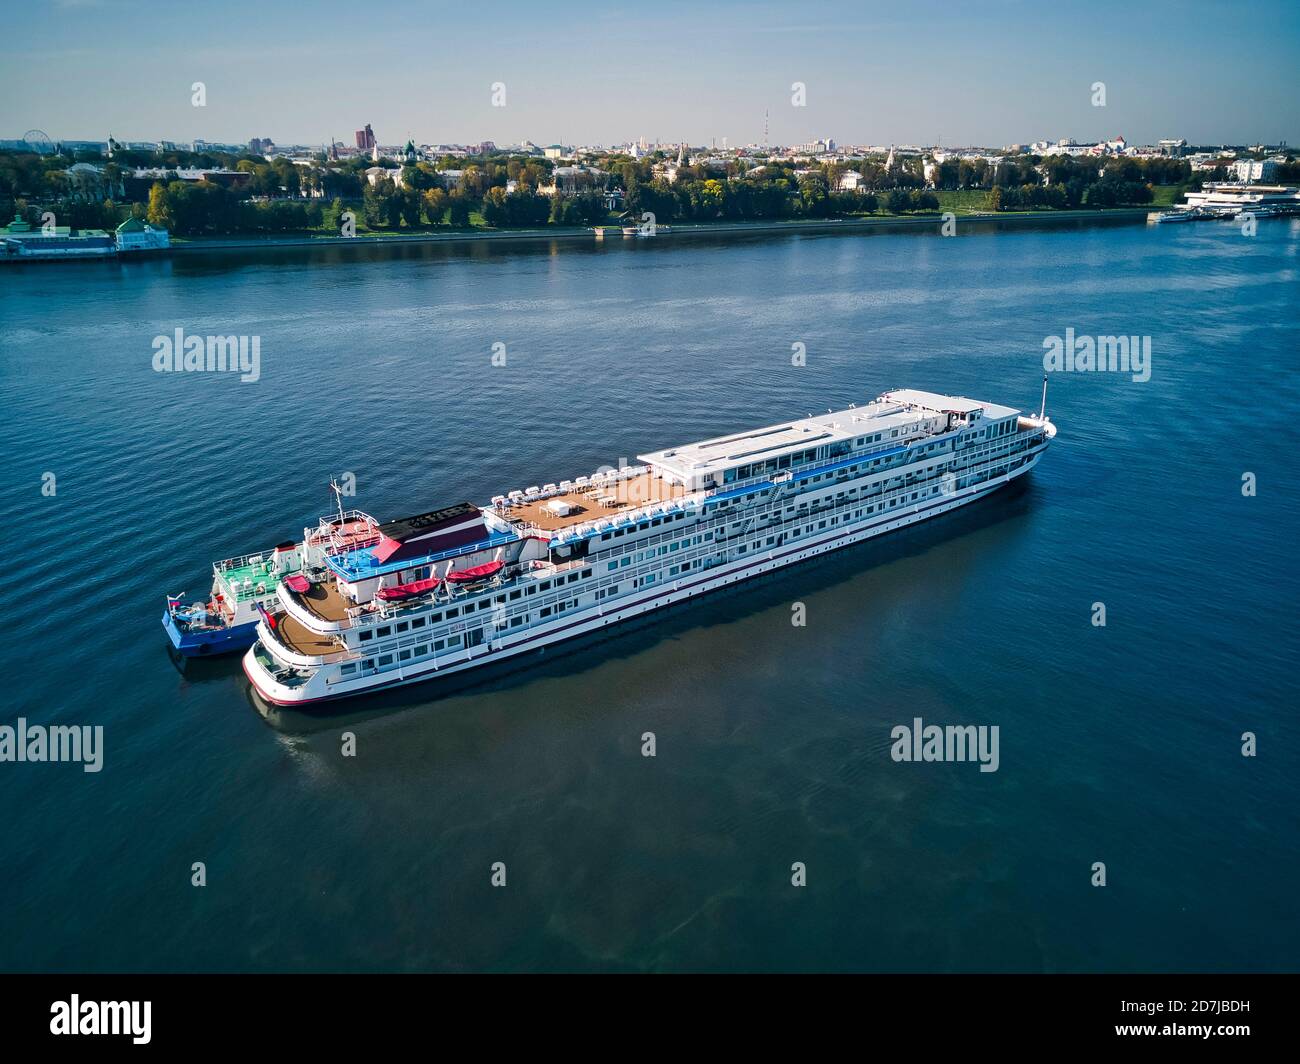 Aerial view of recreational boat being refueled from barge on Volga River near city during sunny day Stock Photo